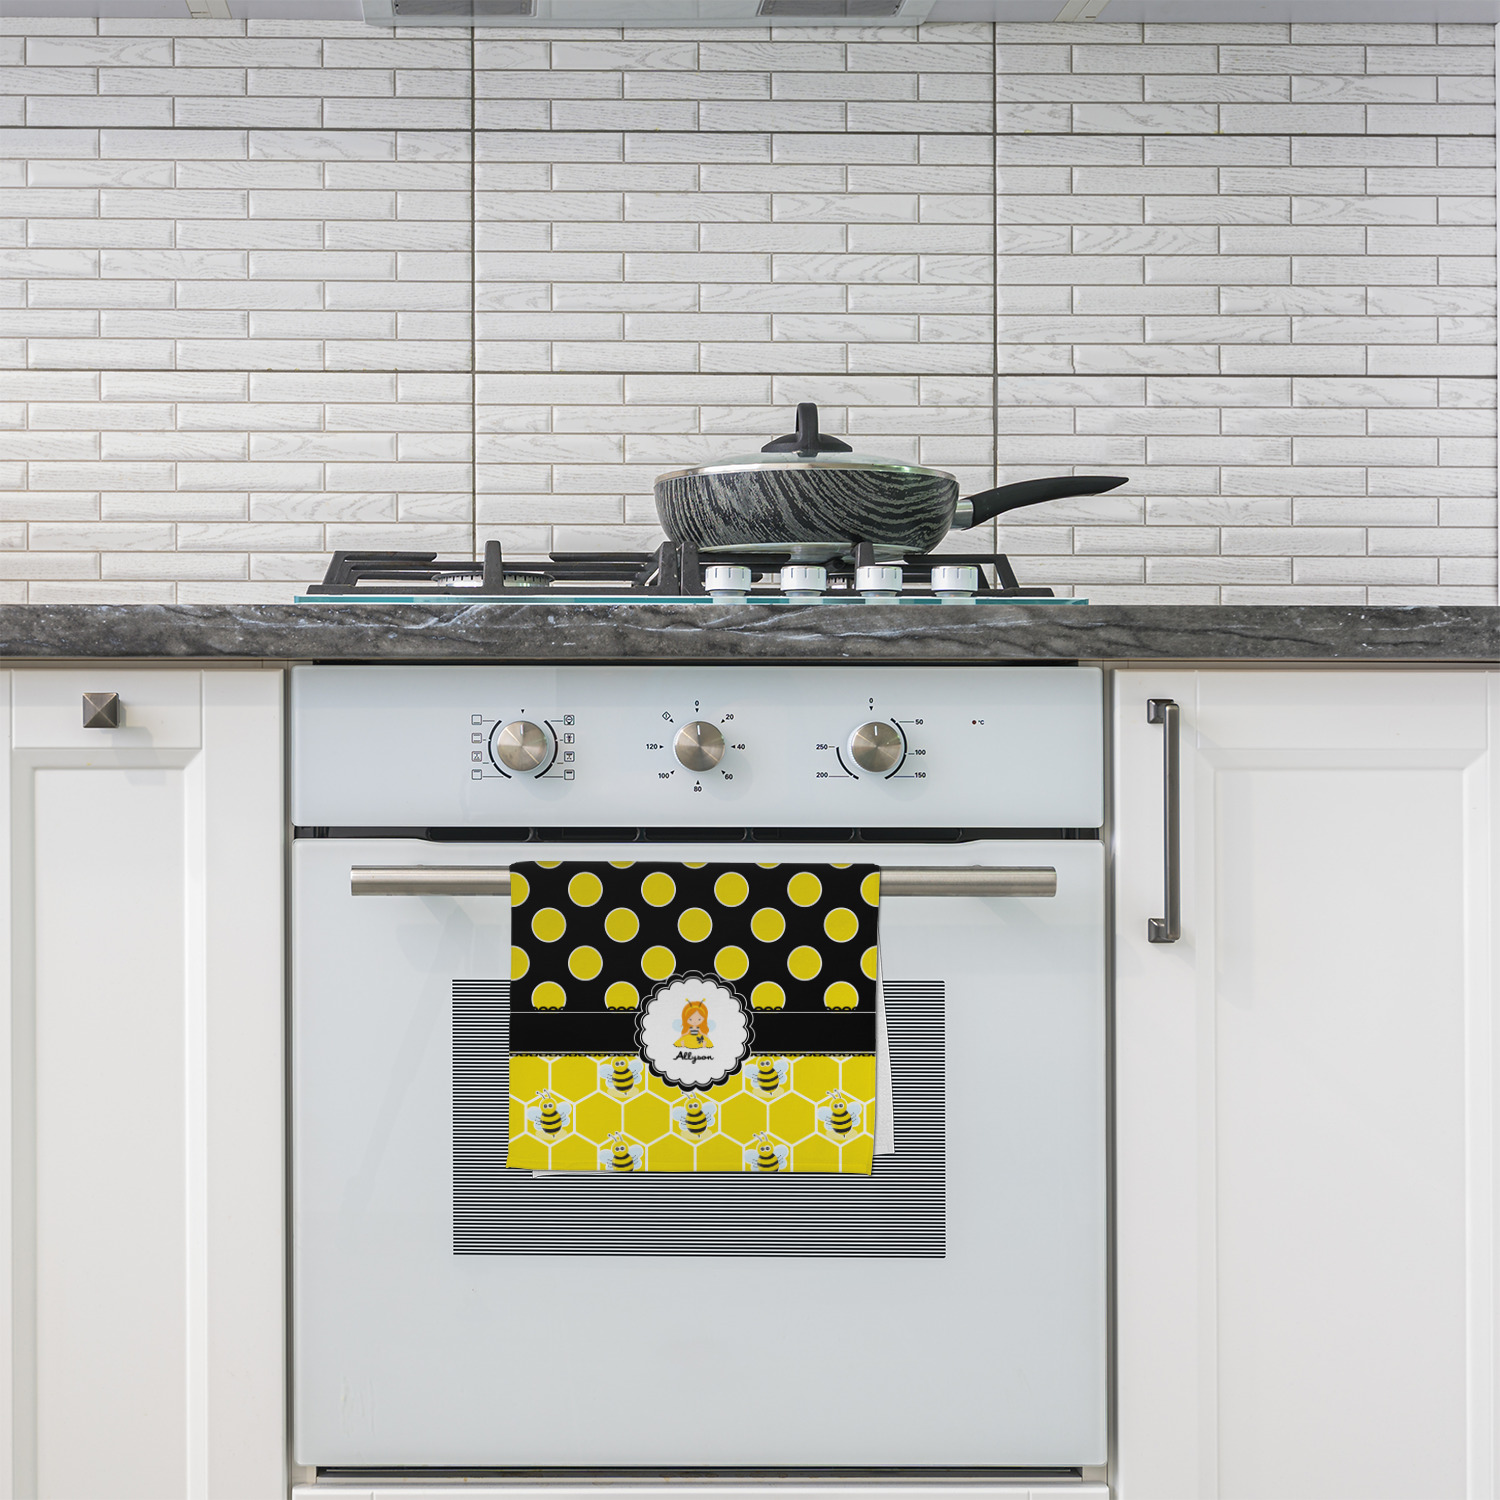 https://www.youcustomizeit.com/common/MAKE/200680/Honeycomb-Bees-Polka-Dots-Kitchen-Towel-Full-Print-LIFESTYLE.jpg?lm=1611258863